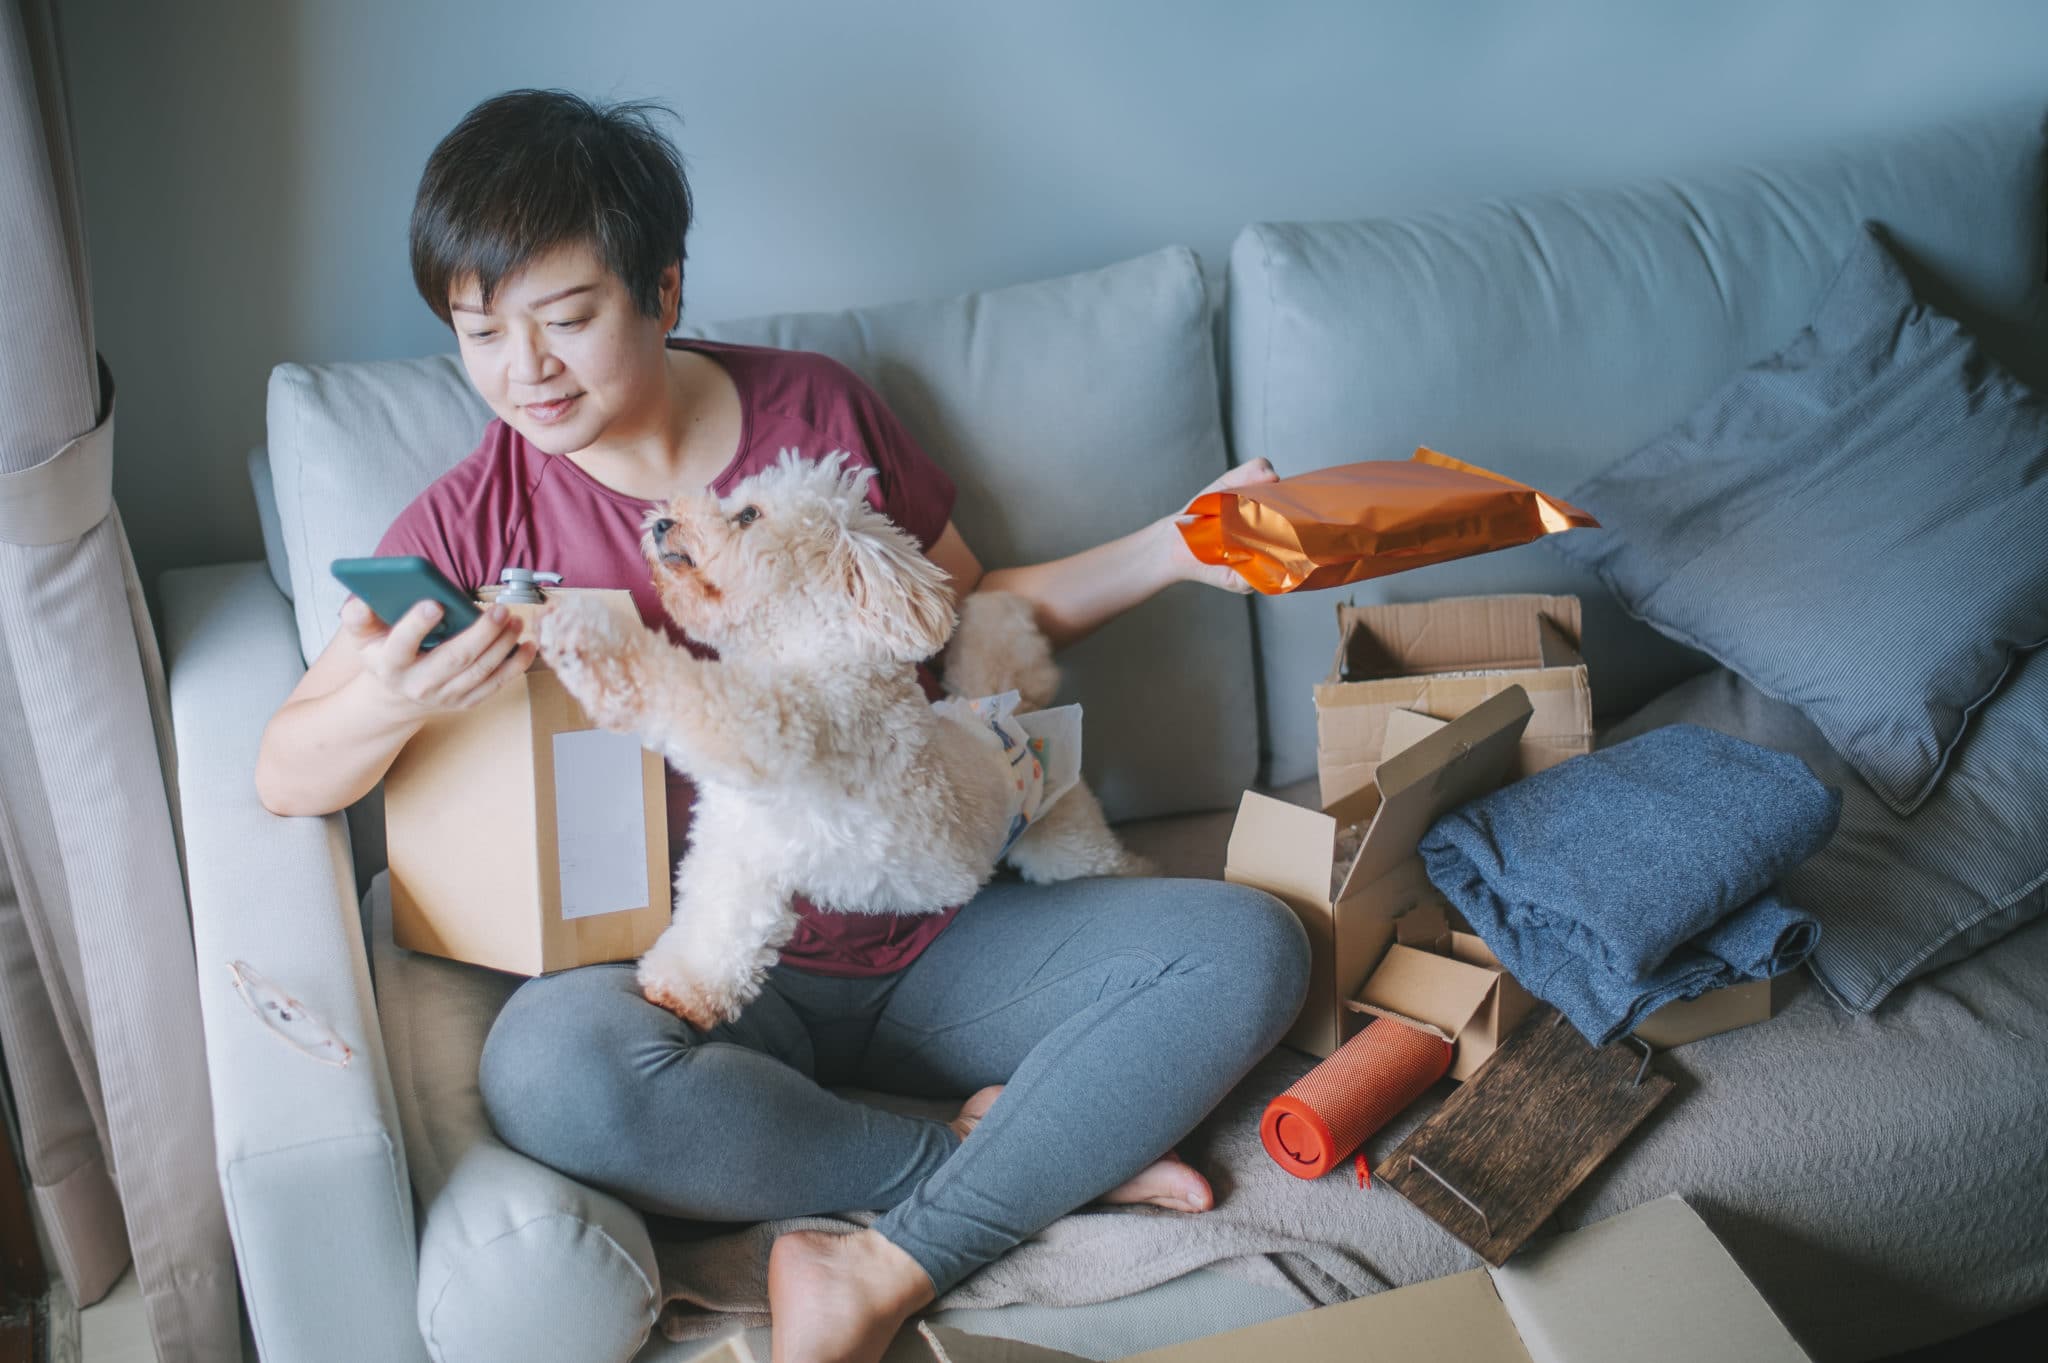 person on the couch with their online shopping orders and dog checking their phone